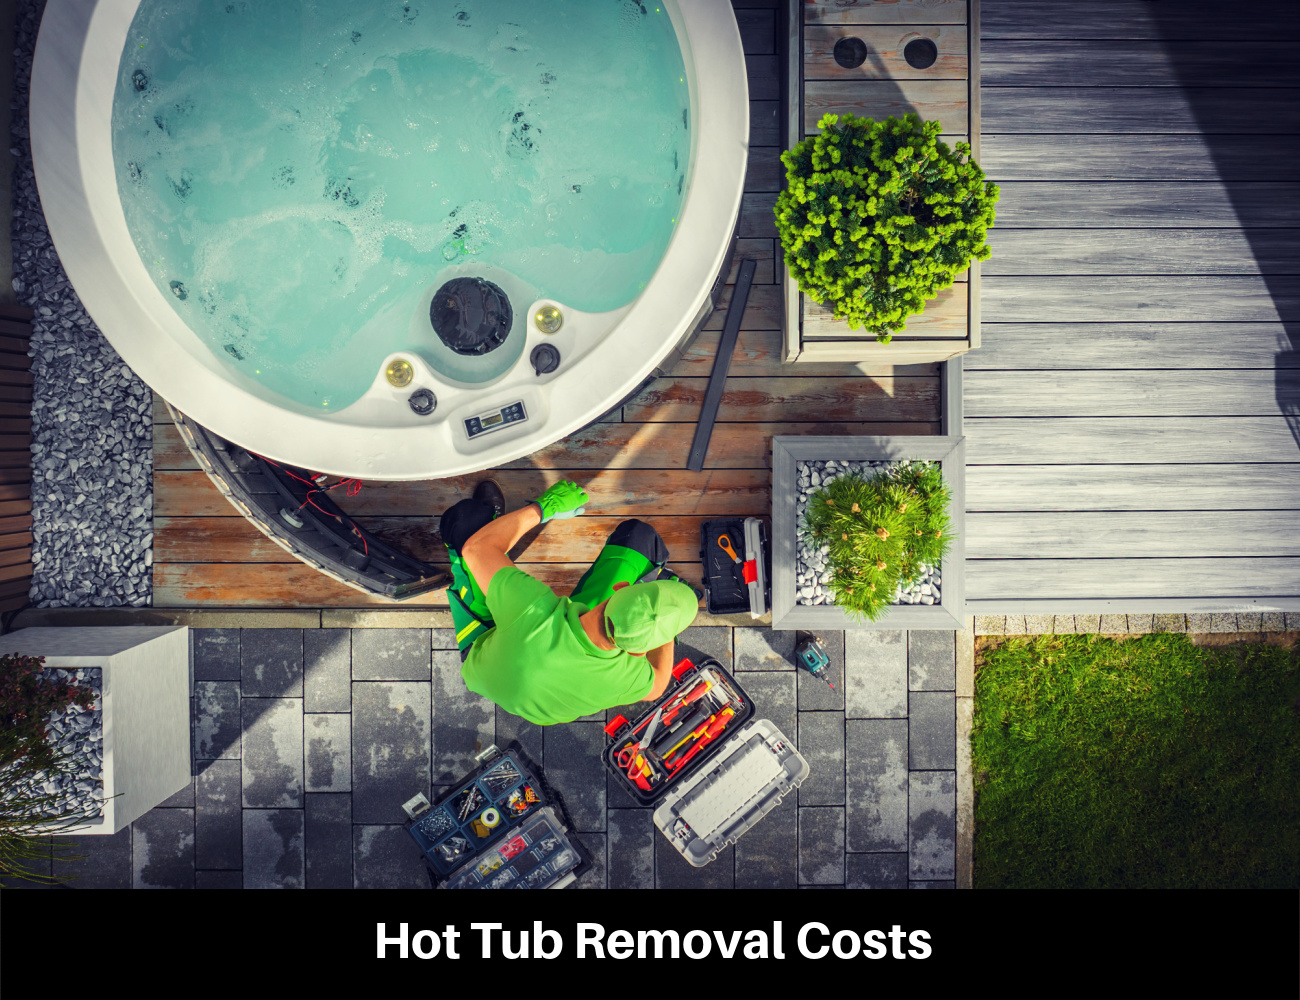 Hot Tub Removal Costs